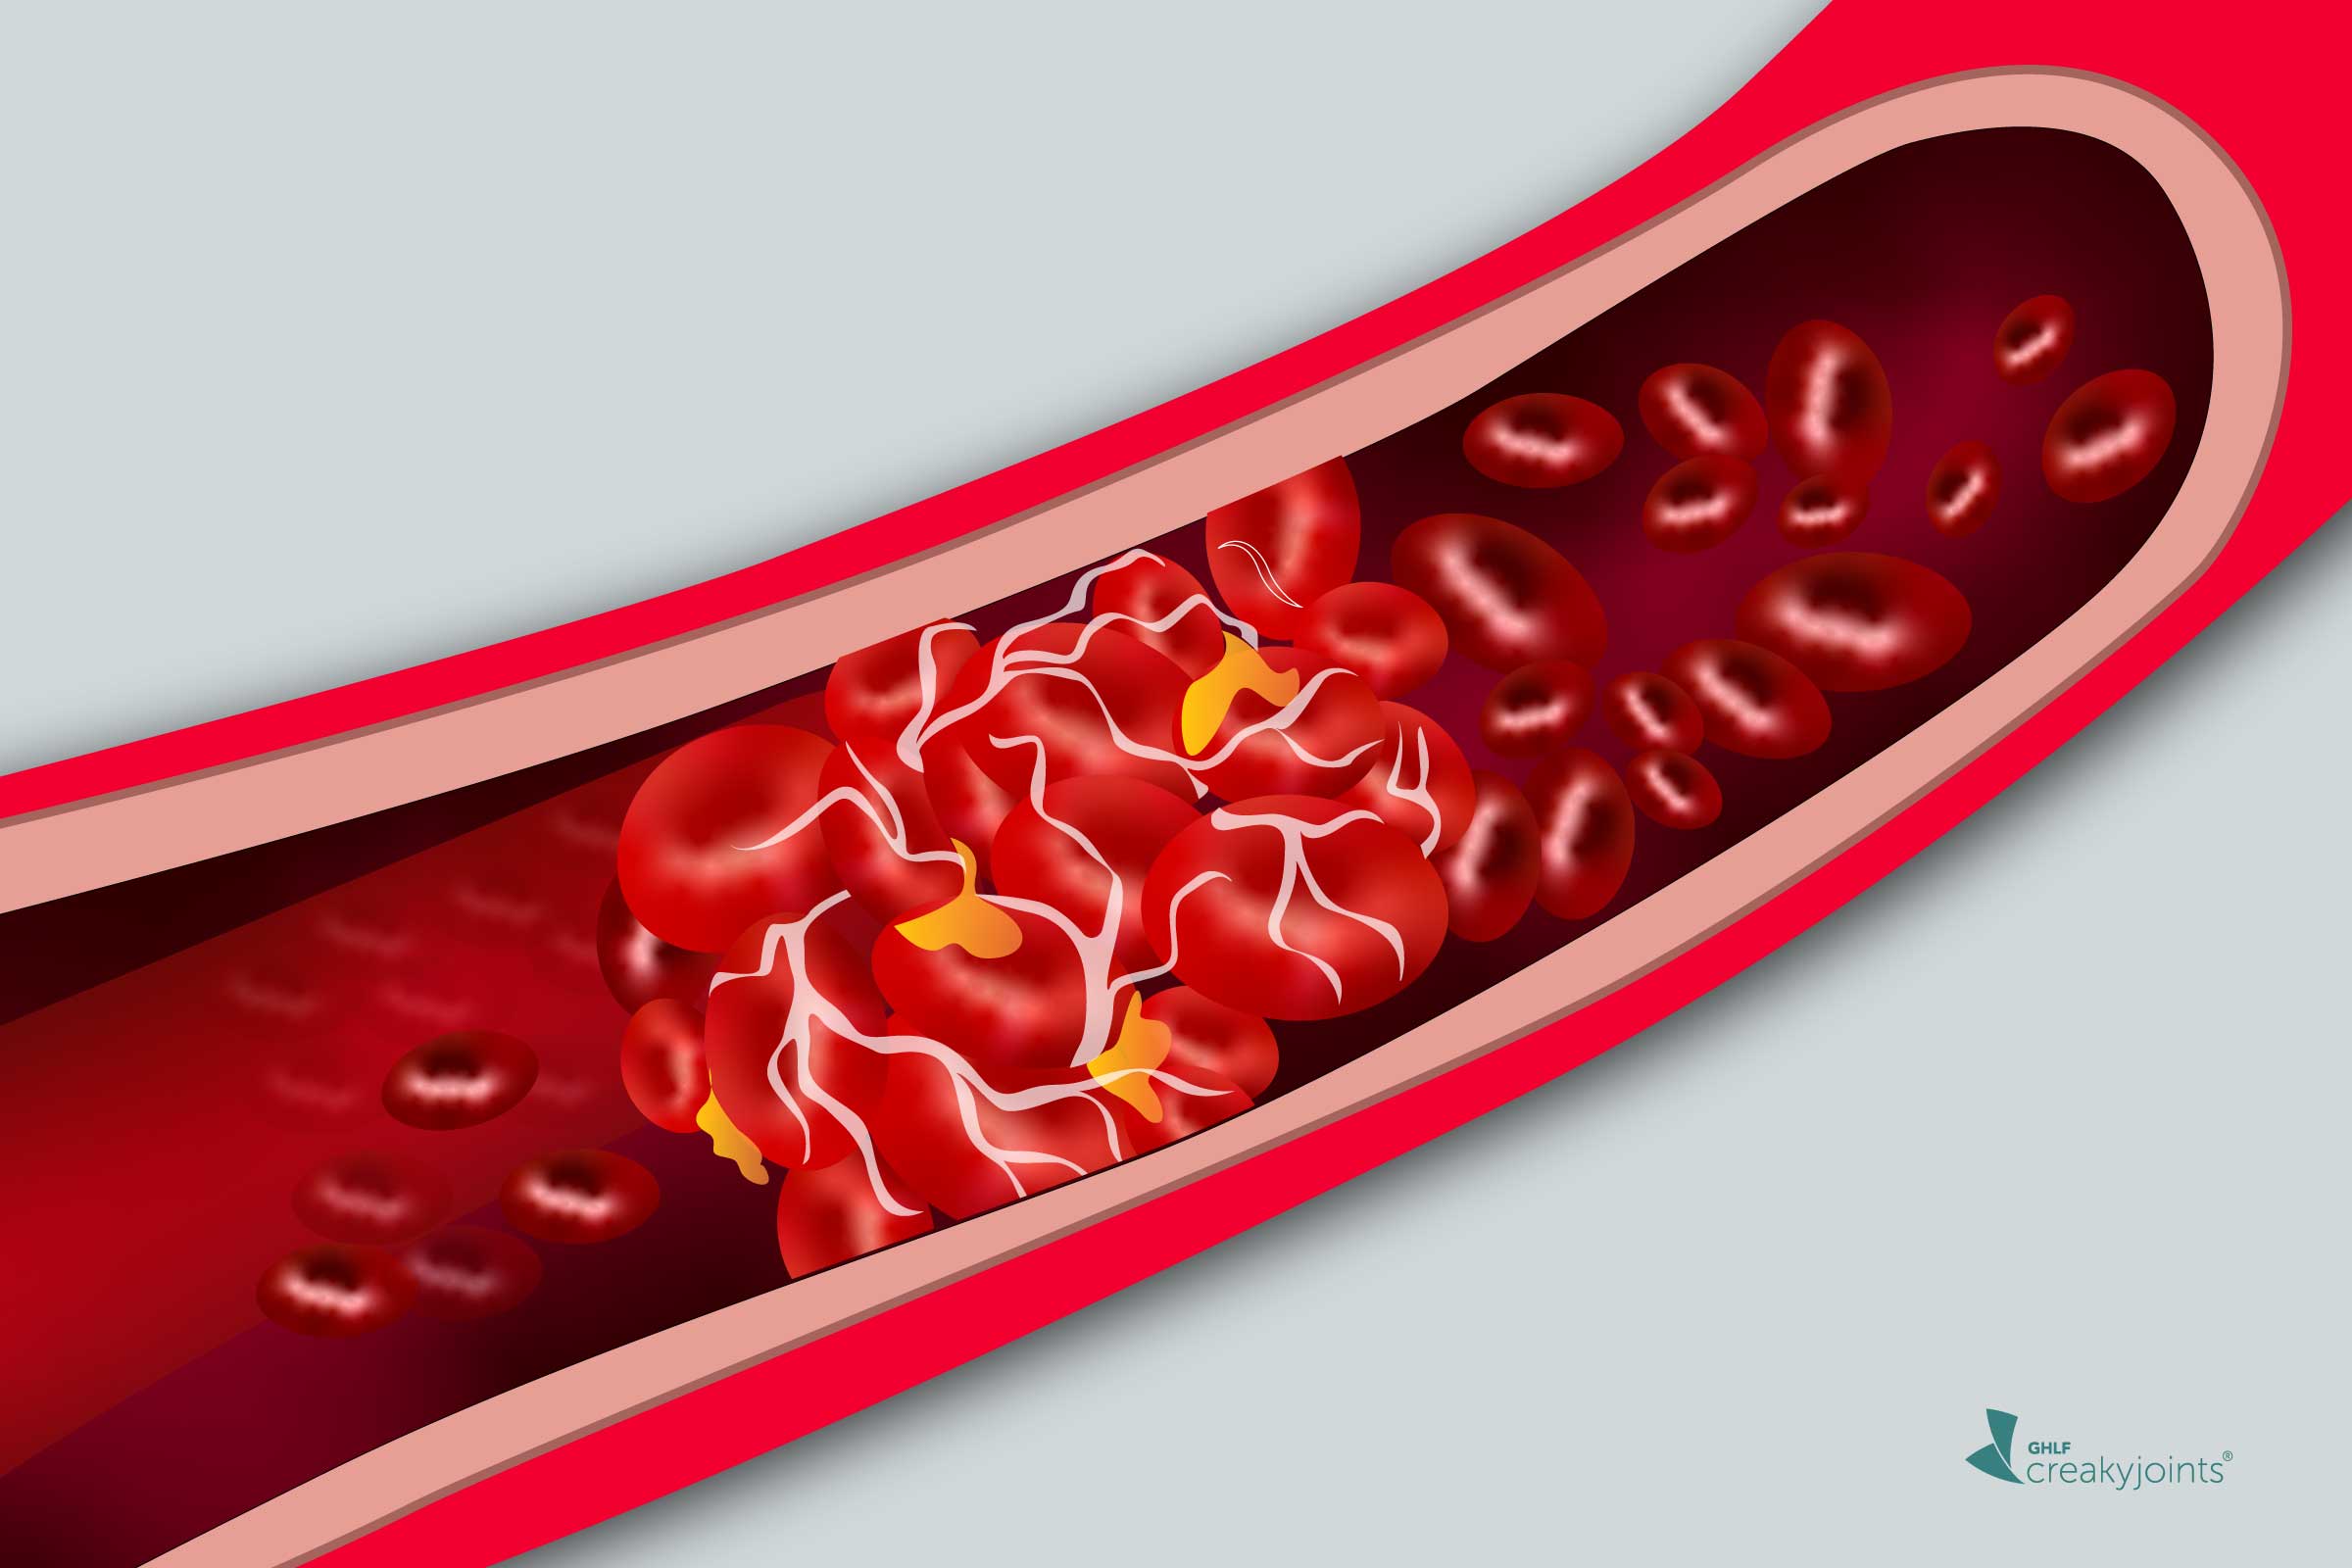 RISK OF BLOOD CLOTS.